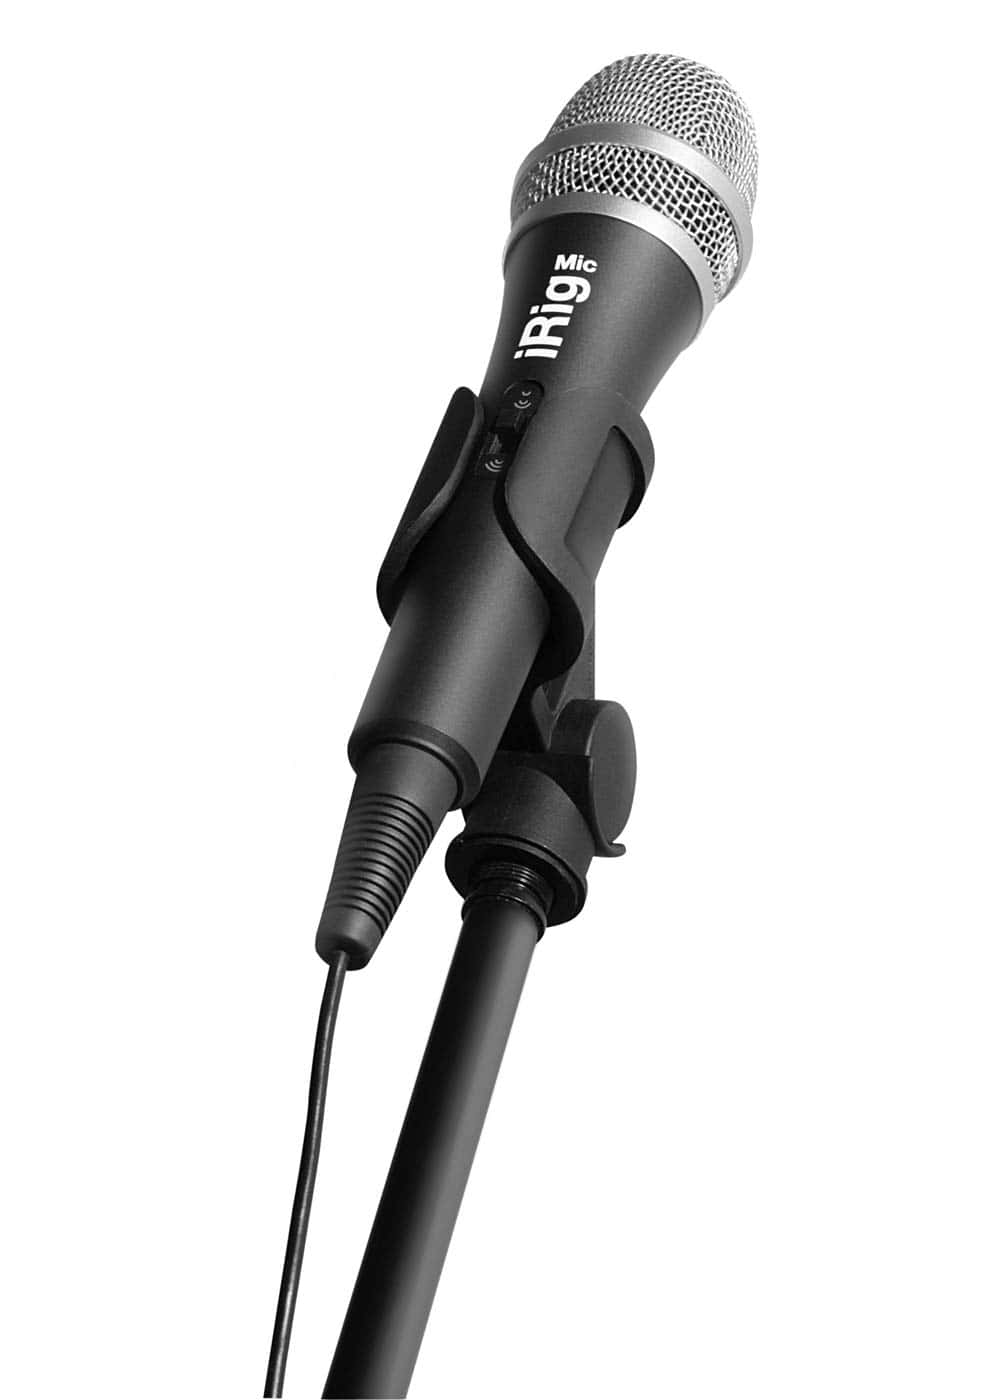 Professional studio microphone capturing sound in high resolution